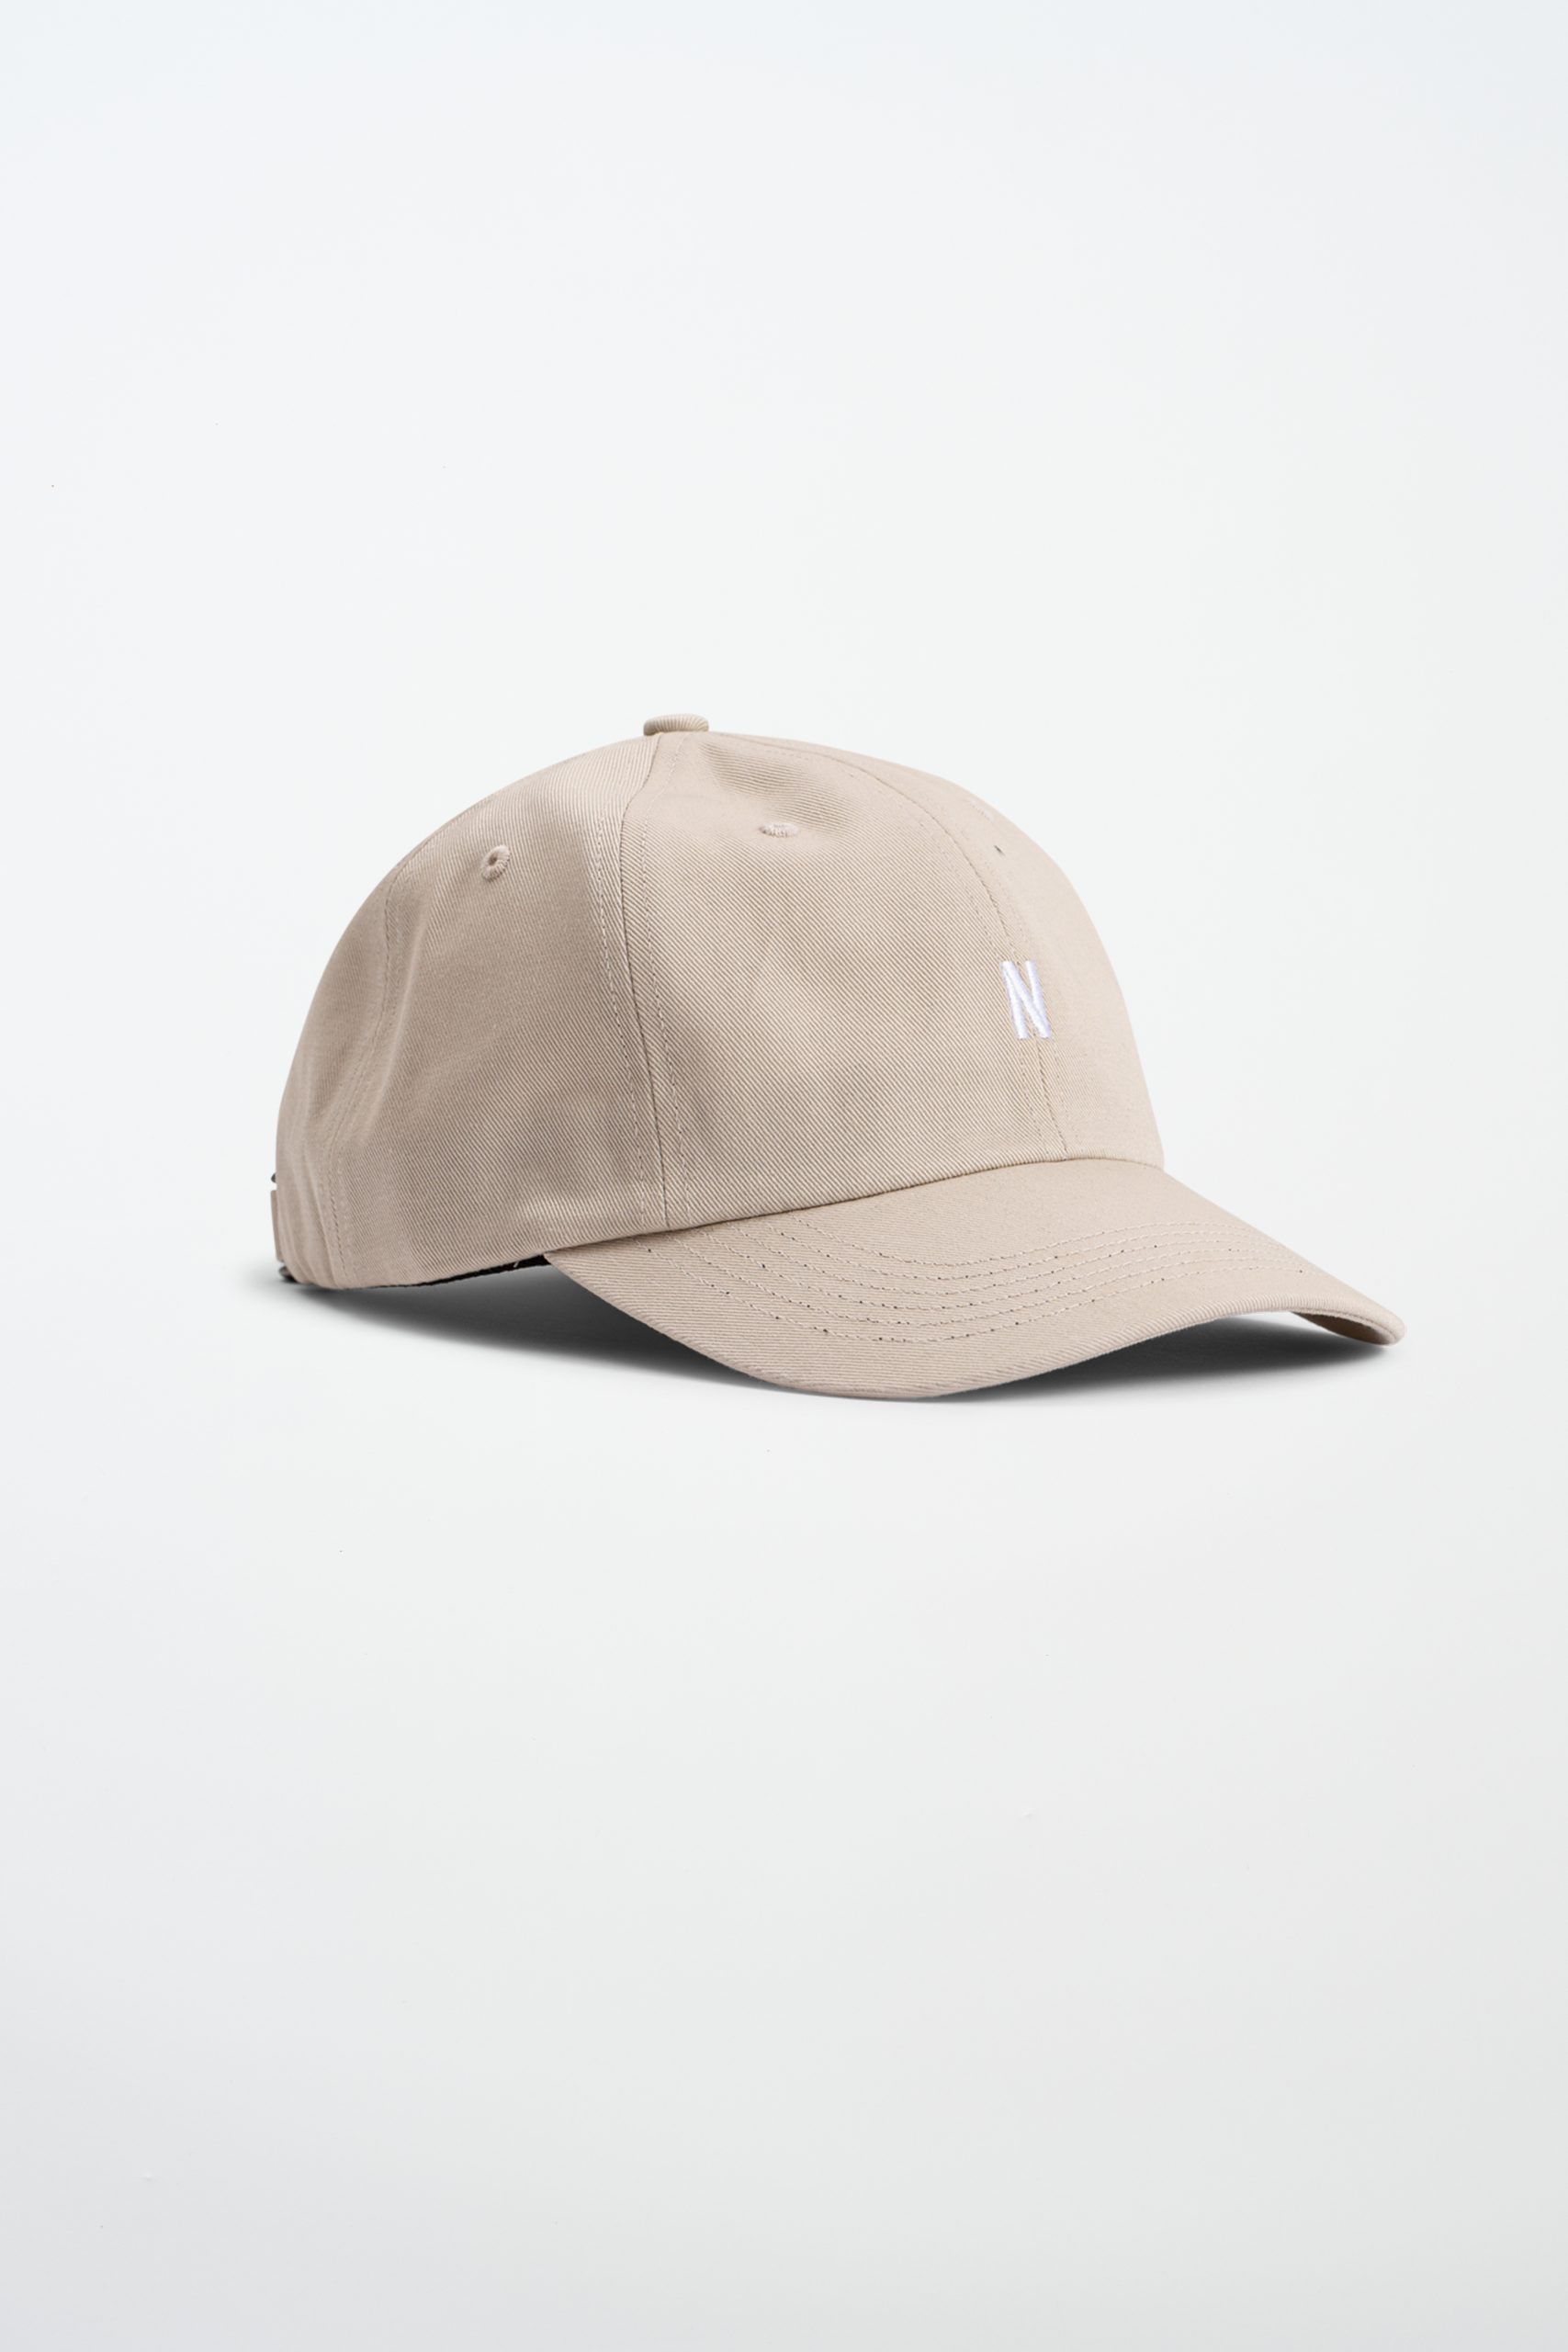 NORSE PROJECTS TWILL Sports cap Marble white